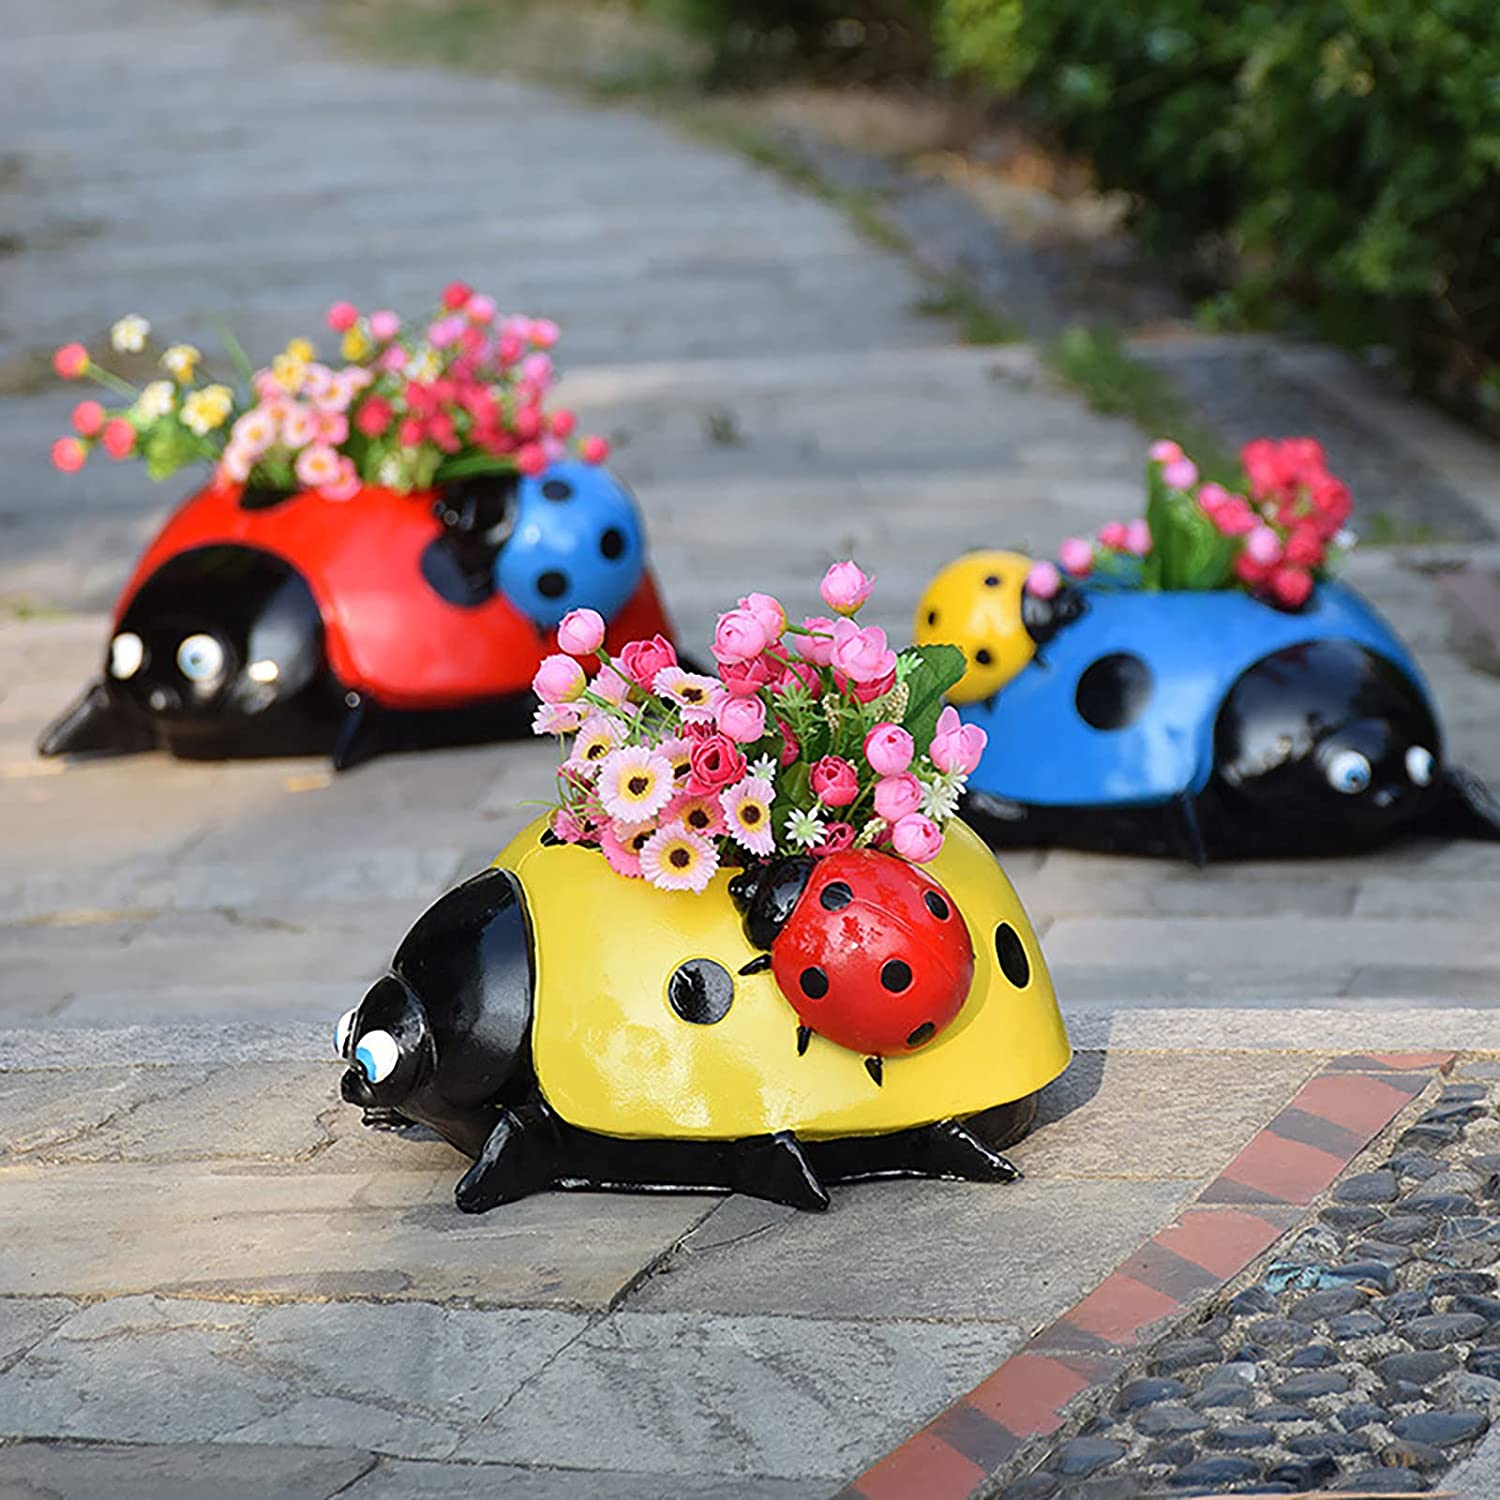 Resin Ladybugs Flower Pot Garden Decorations, Simulation Animal Ladybugs Flower Pot,Outdoor and Garden Decor Patio Yard Planter Flower Pot Indoor or Outdoor Decorations (Red) - image 4 of 7